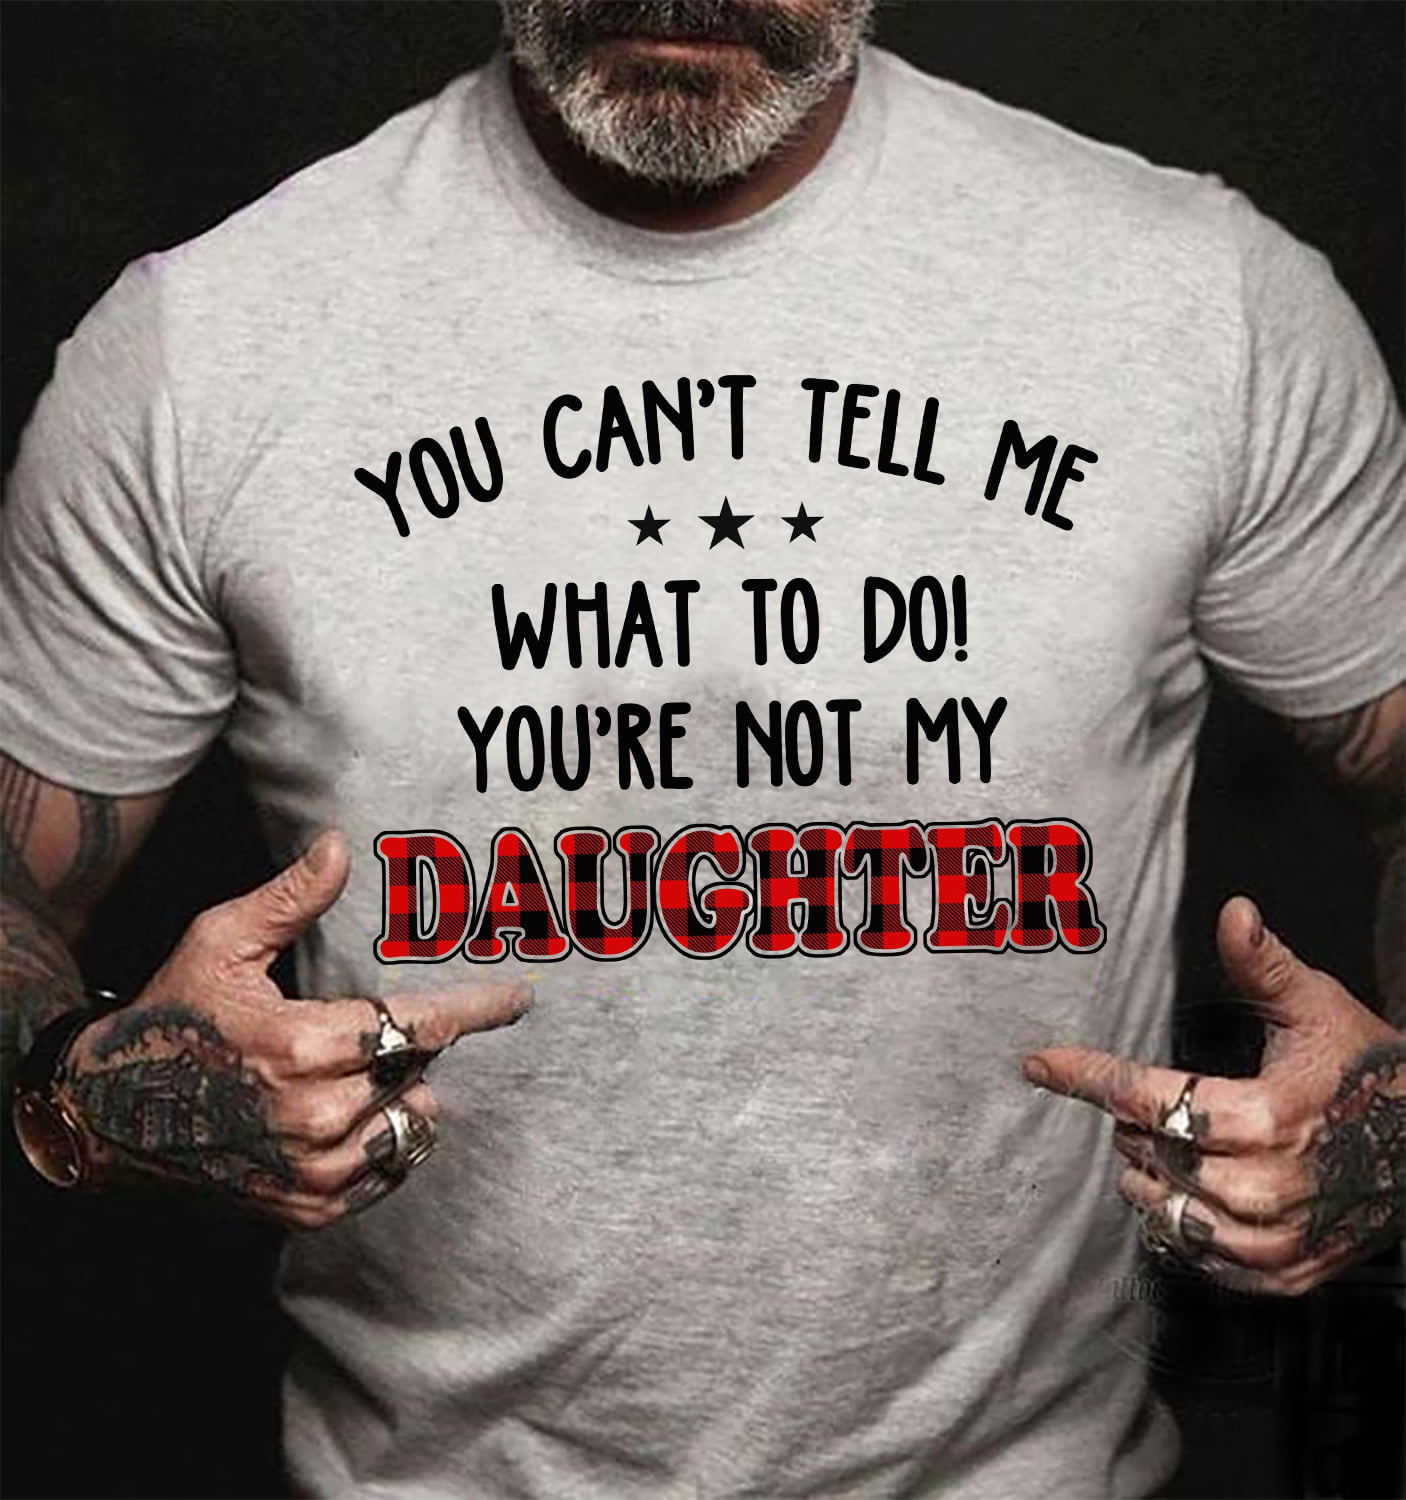 You can't tell me what to do! You're not my Daughter